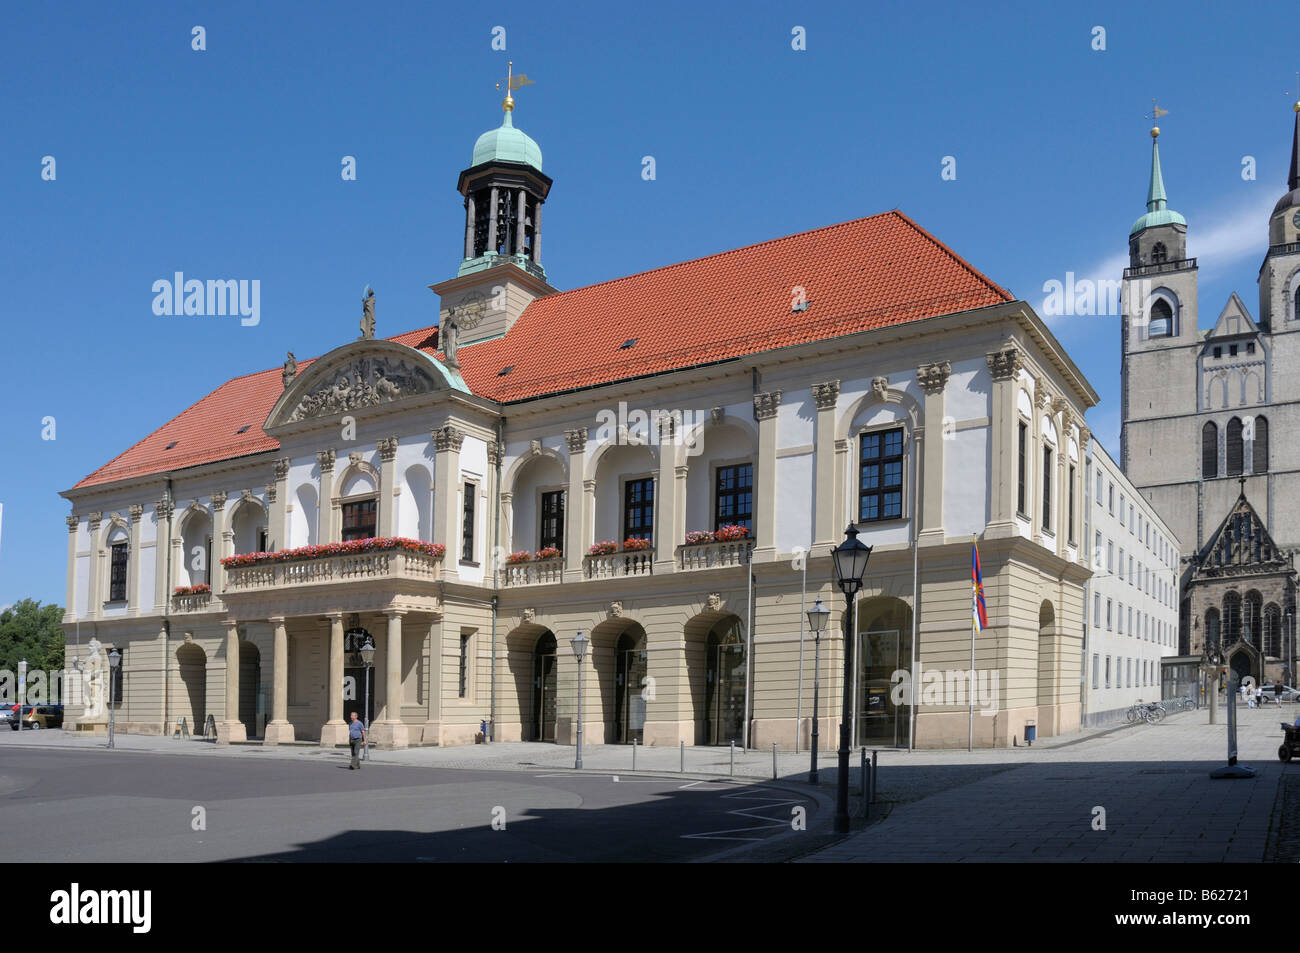 The old townhall, market, Magdeburg, Saxony-Anhalt, Germany, Europe Stock Photo